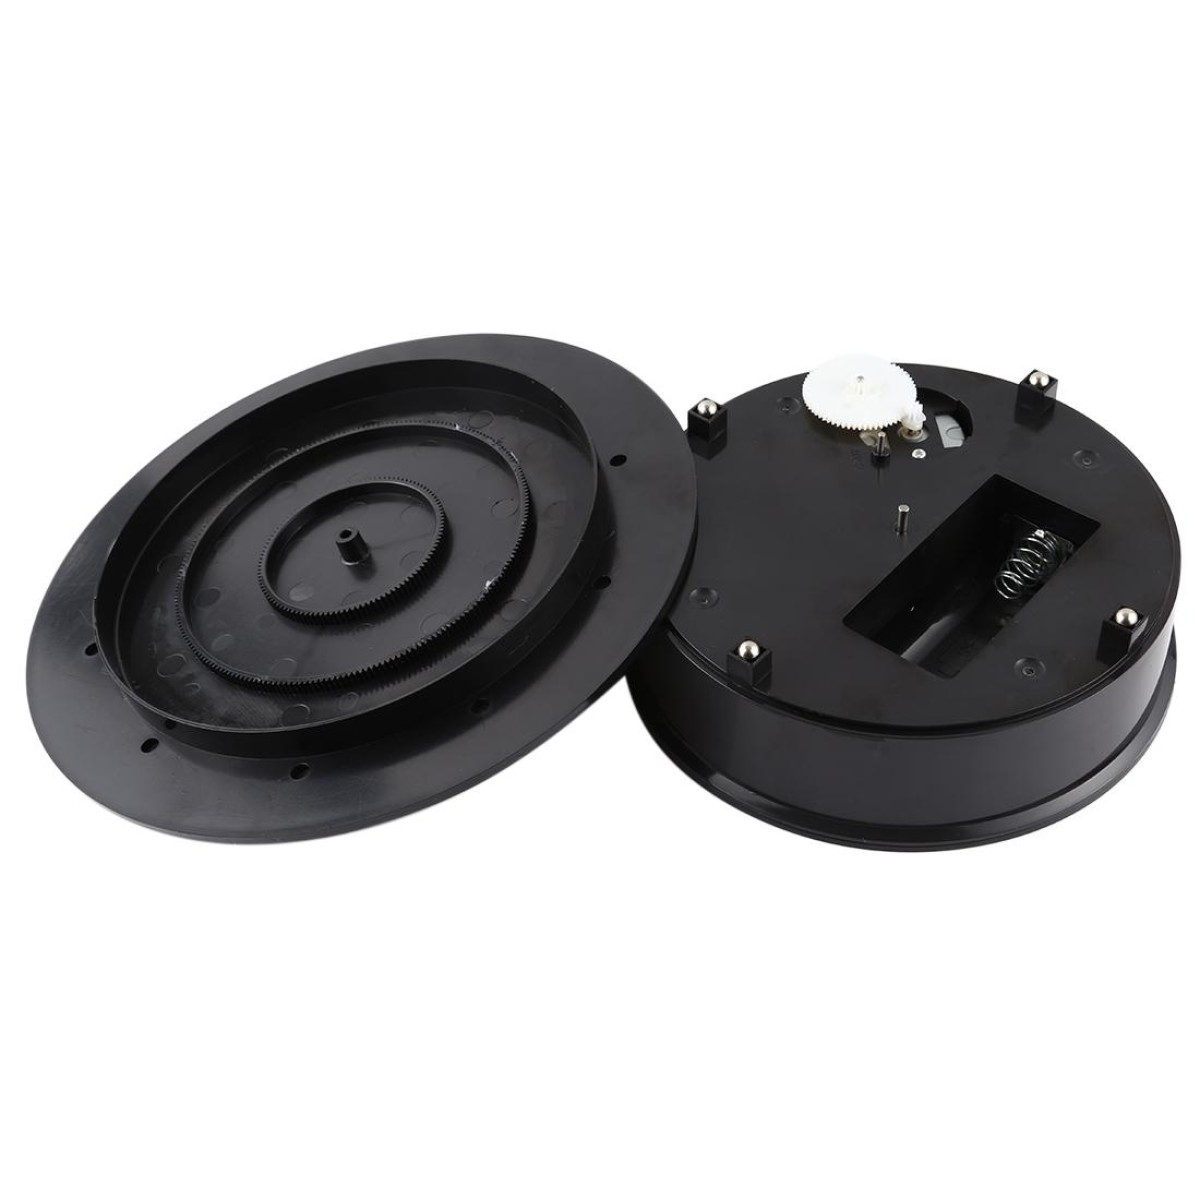 30cm 360 Degree Electric Rotating Turntable Display Stand Video Shooting Props Turntable for Photography, Load 4kg (Black)